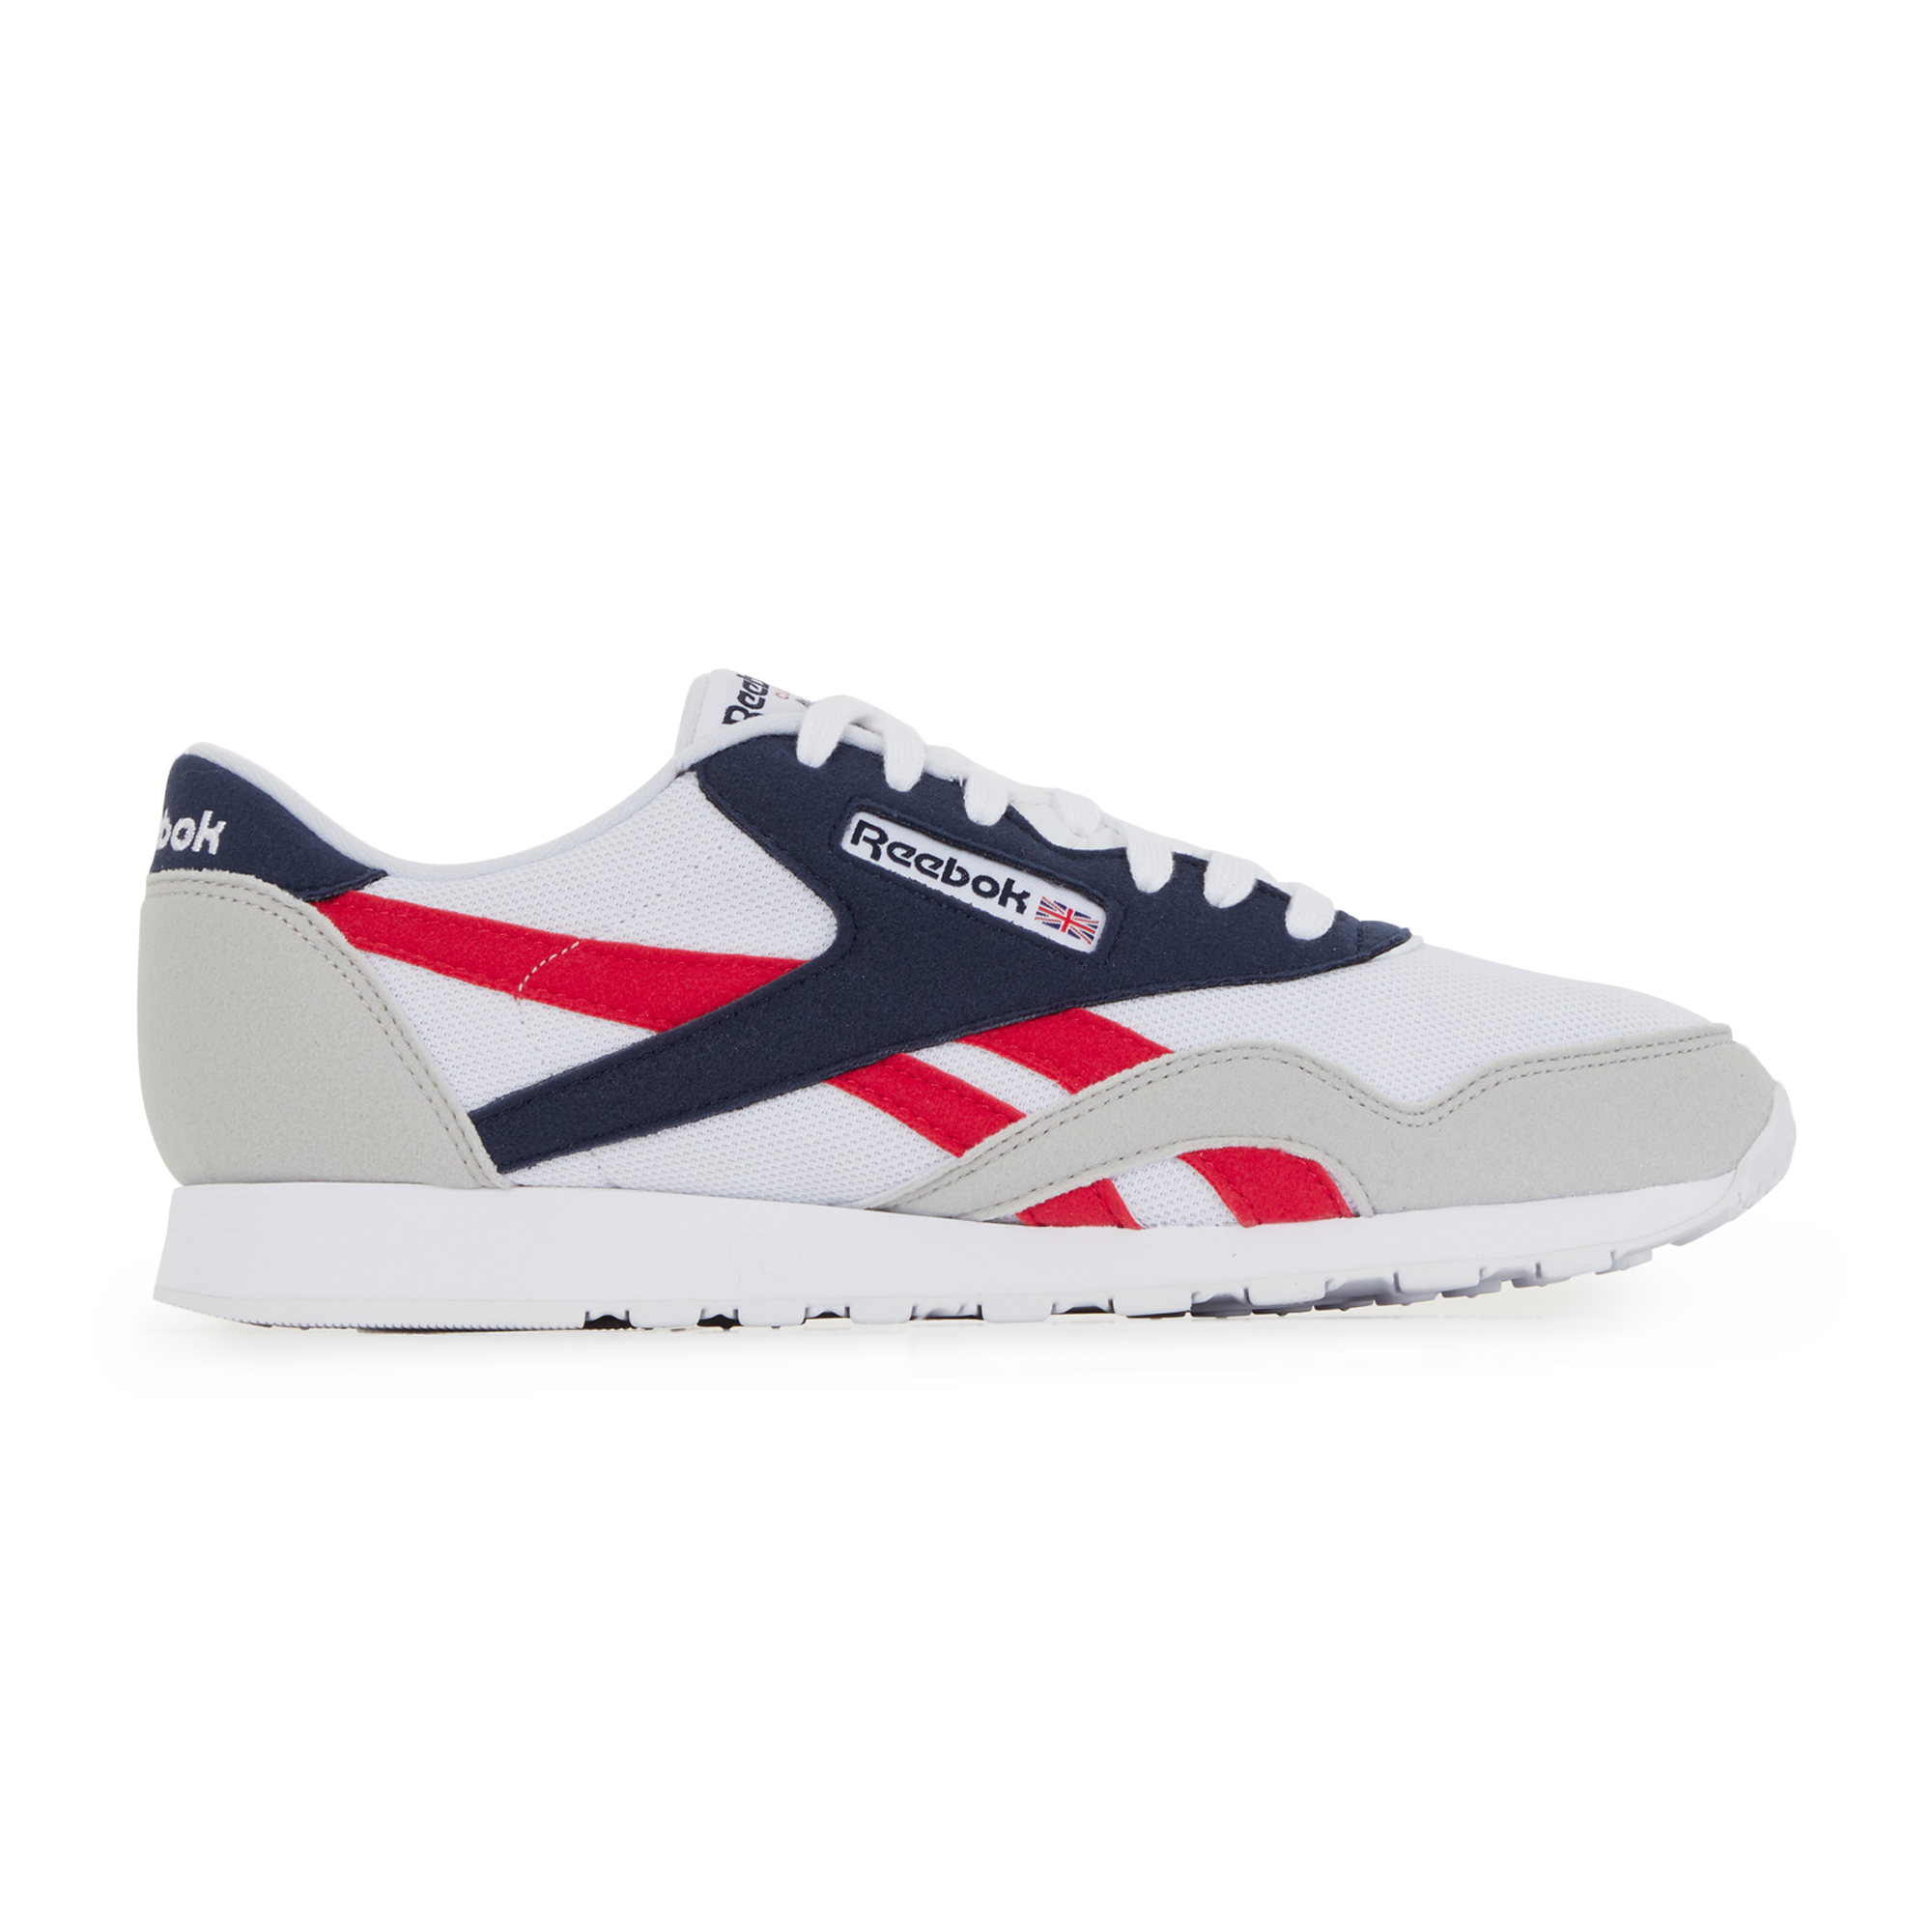 darse cuenta Mutuo Infectar REEBOK CLASSIC NYLON WHITE/BLUE/RED - SNEAKERS MEN | Courir.com